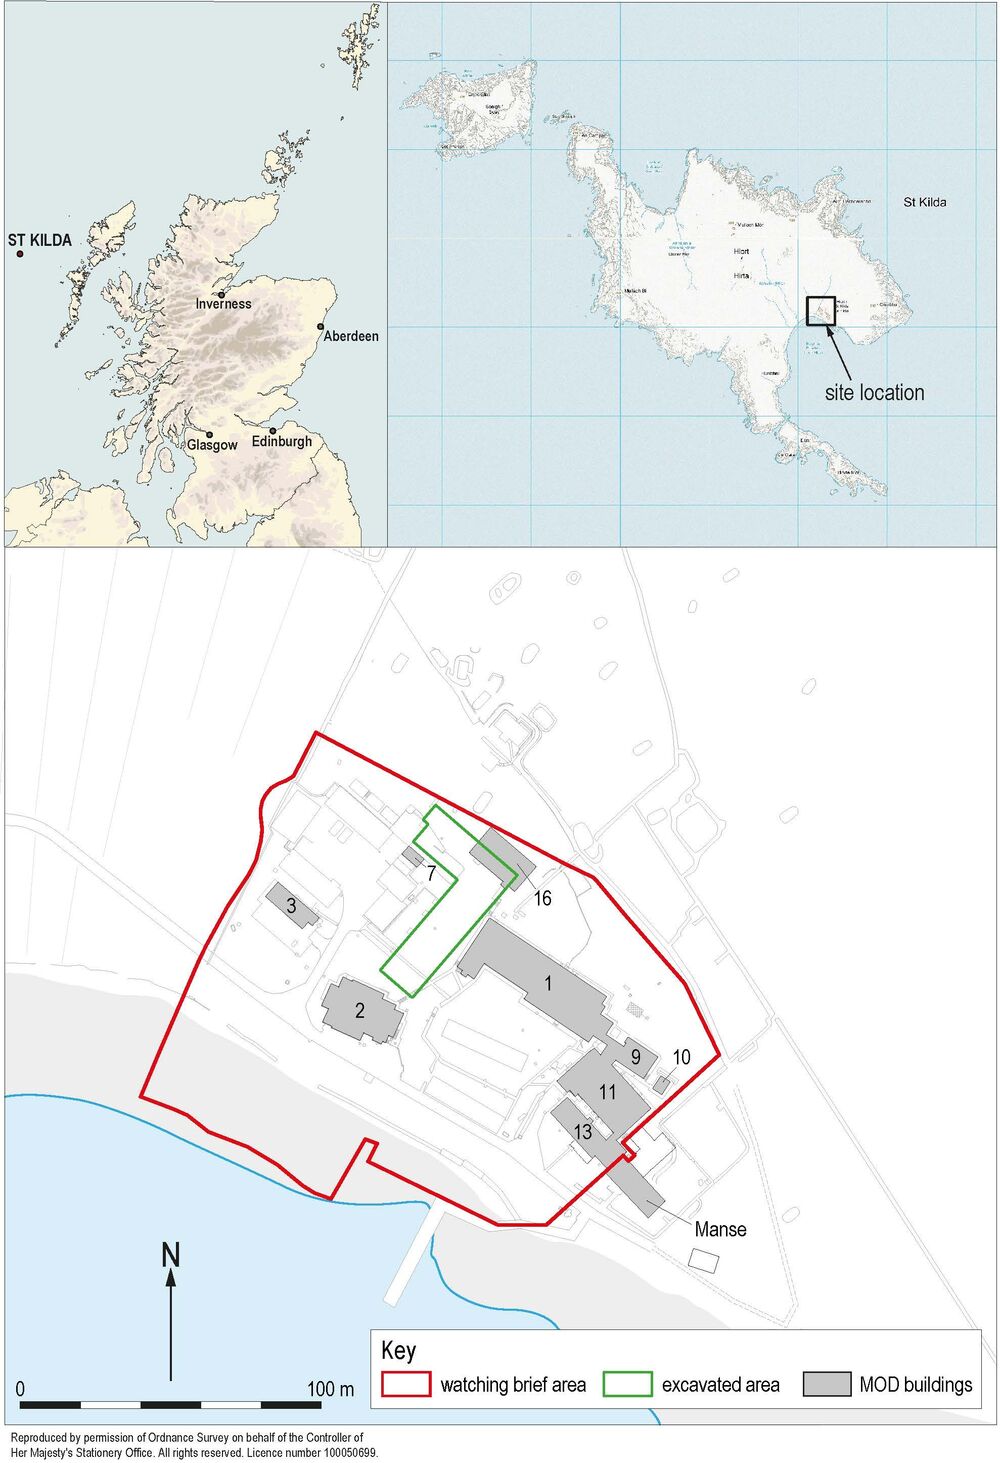 Three line drawings: in the top left Scotland is shown; top right the islands of St Kilda; the bottom illustration shows an area defined by a red line in which several buildings are numbered.